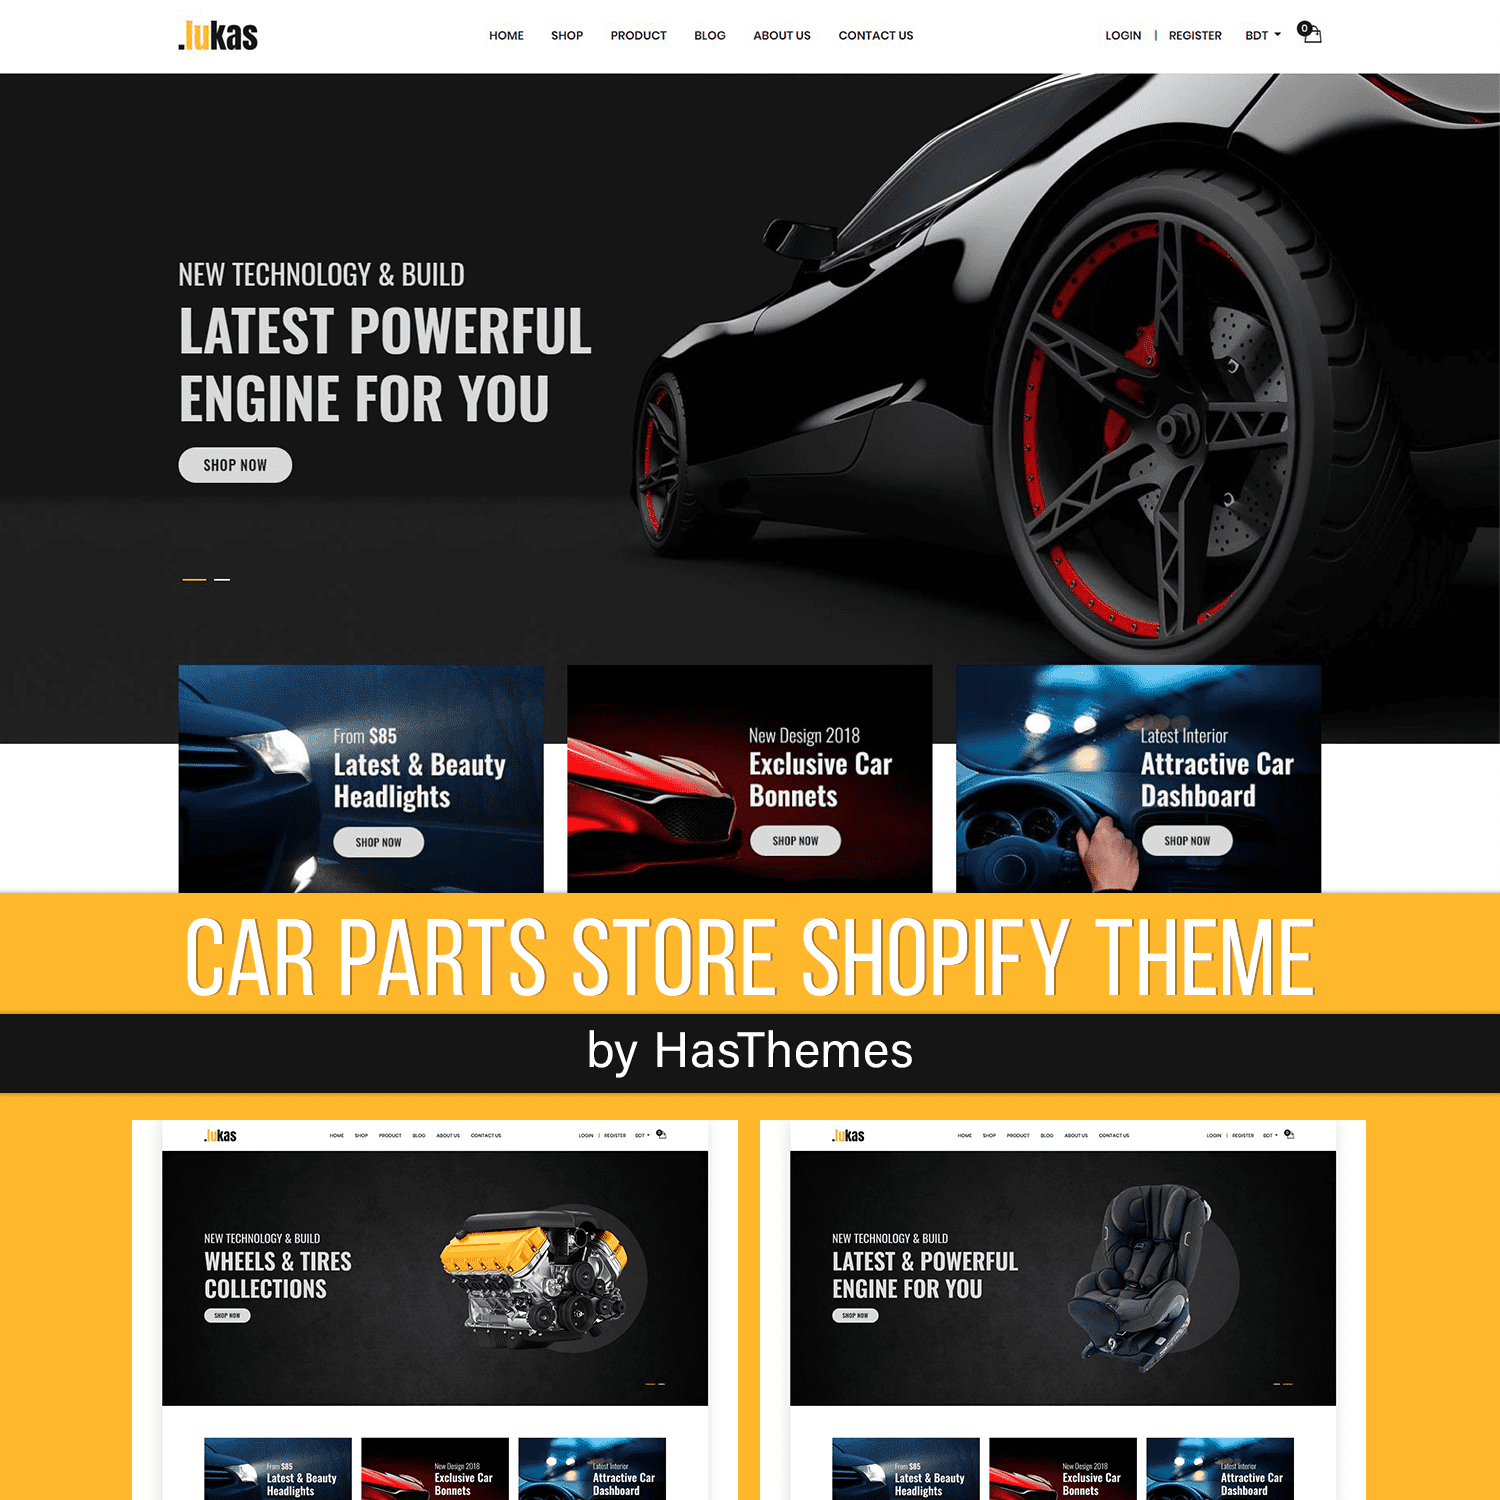 Car Parts Store Shopify Theme - main image preview.